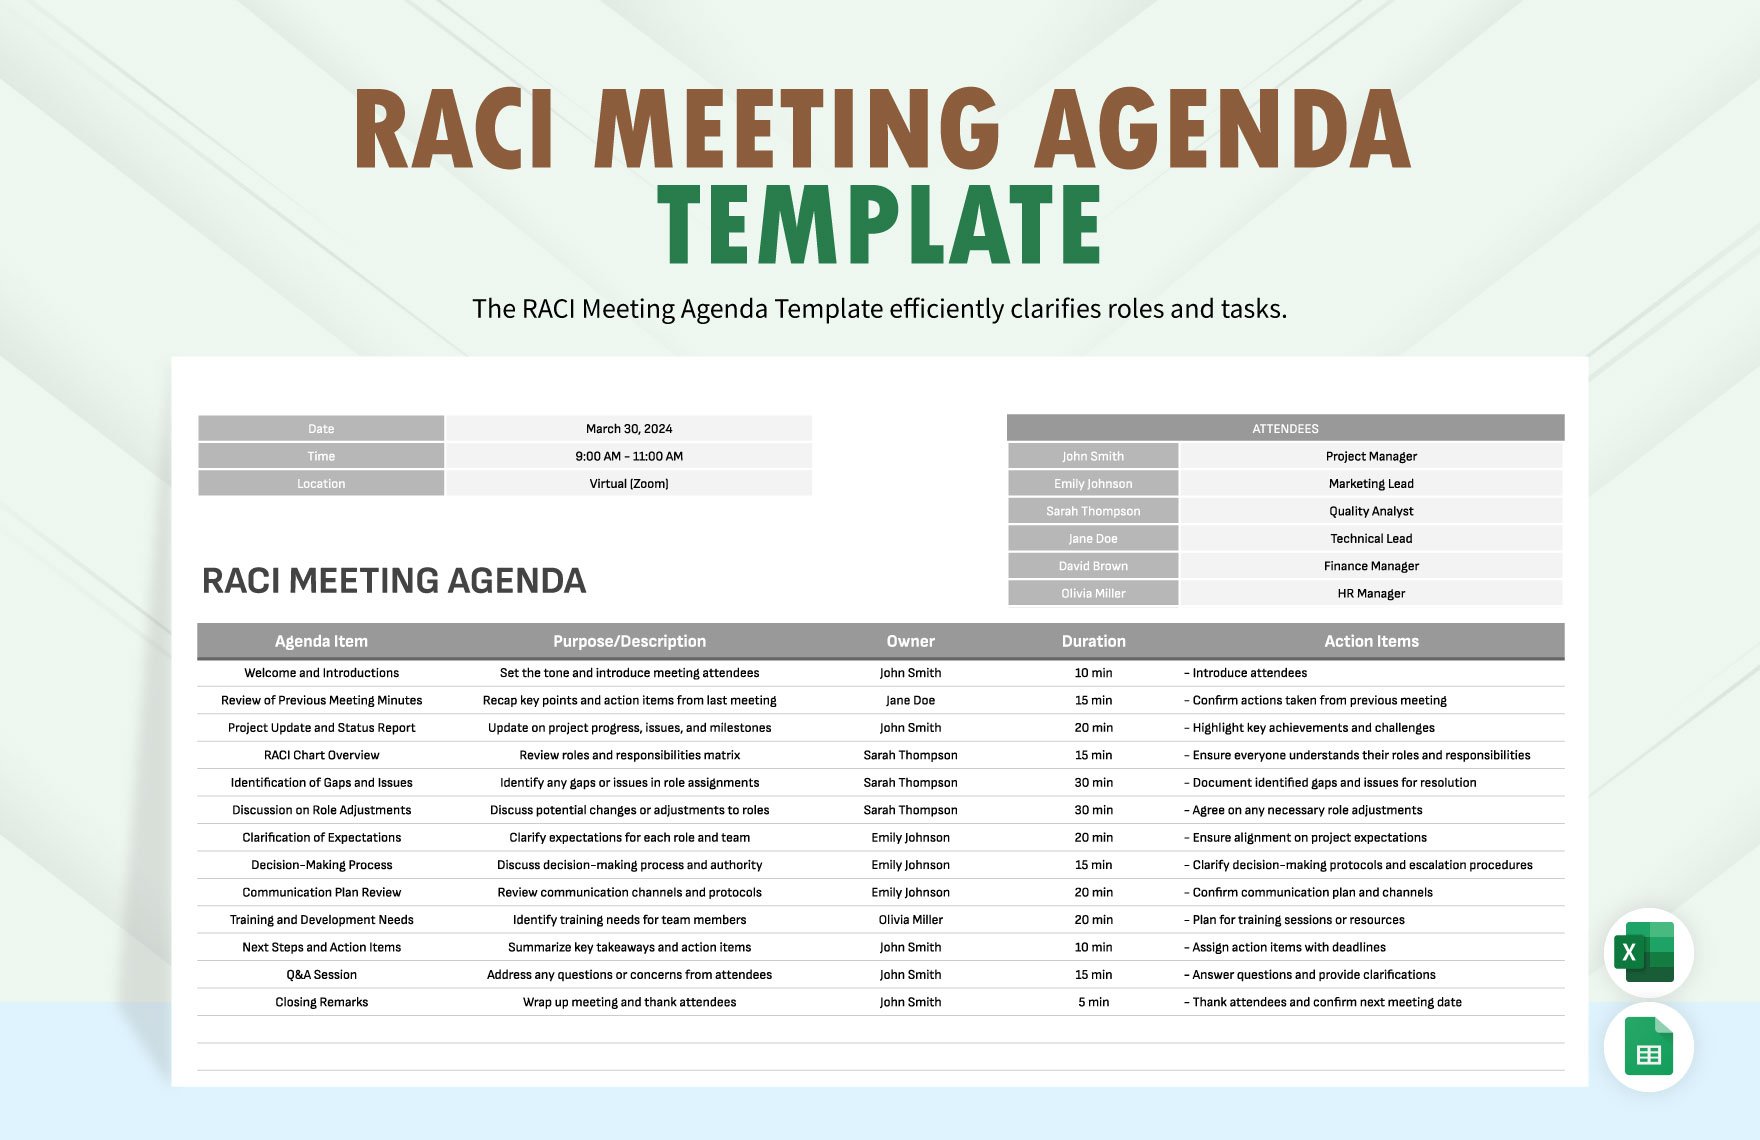 RACI Meeting Agenda Template in Excel, Google Sheets